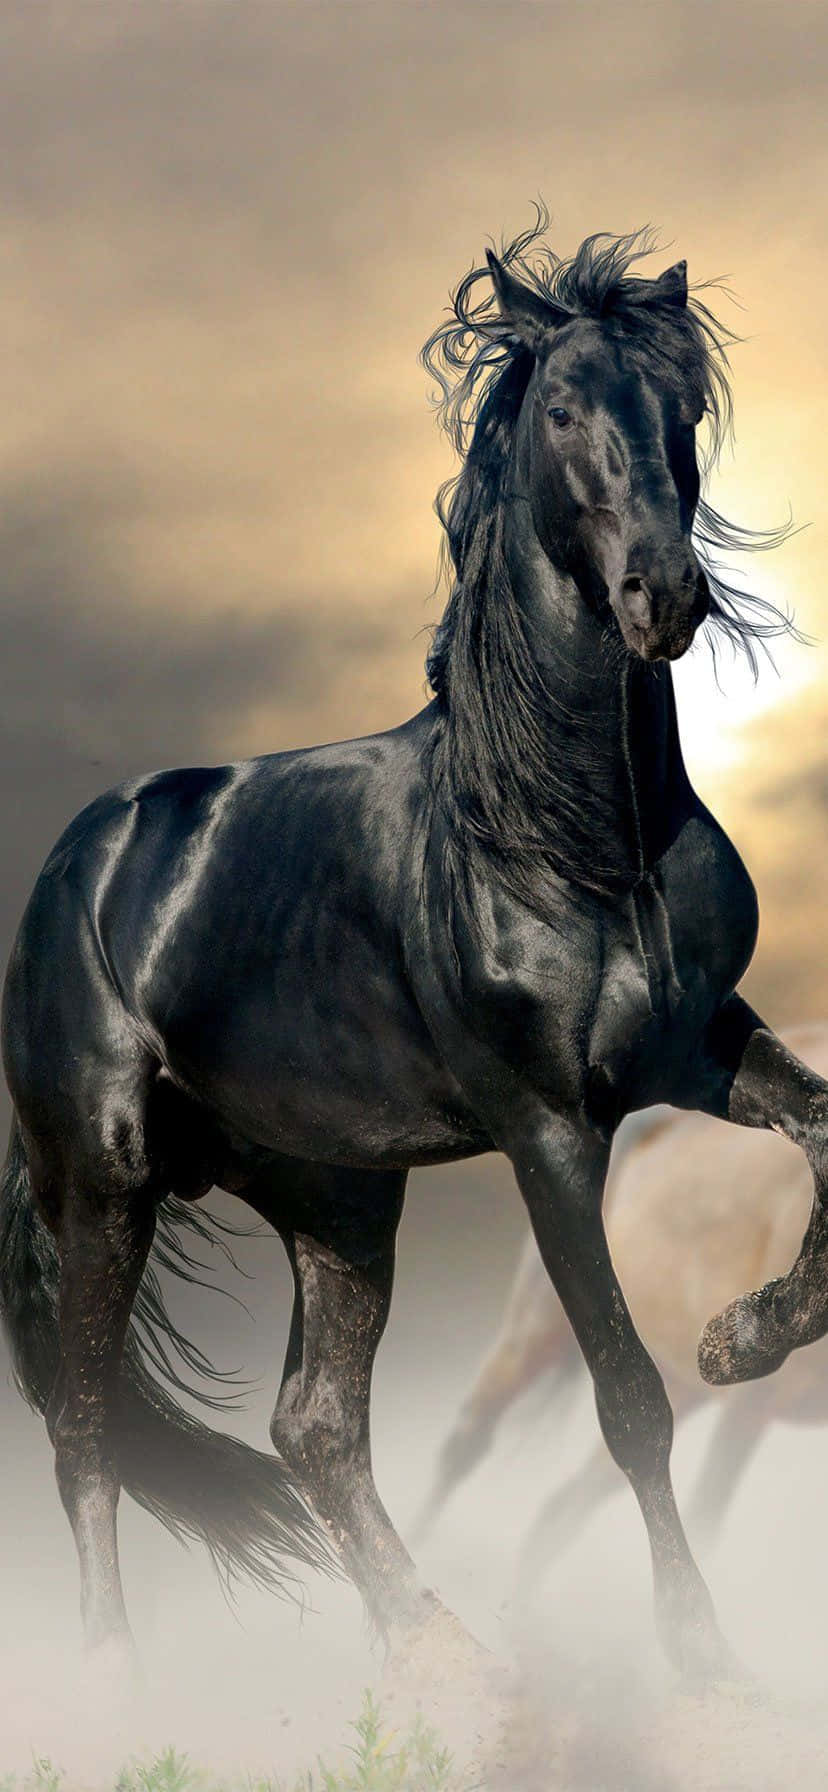 Horse Wallpapers - Top 30 Best Horse Wallpapers [ HQ ]